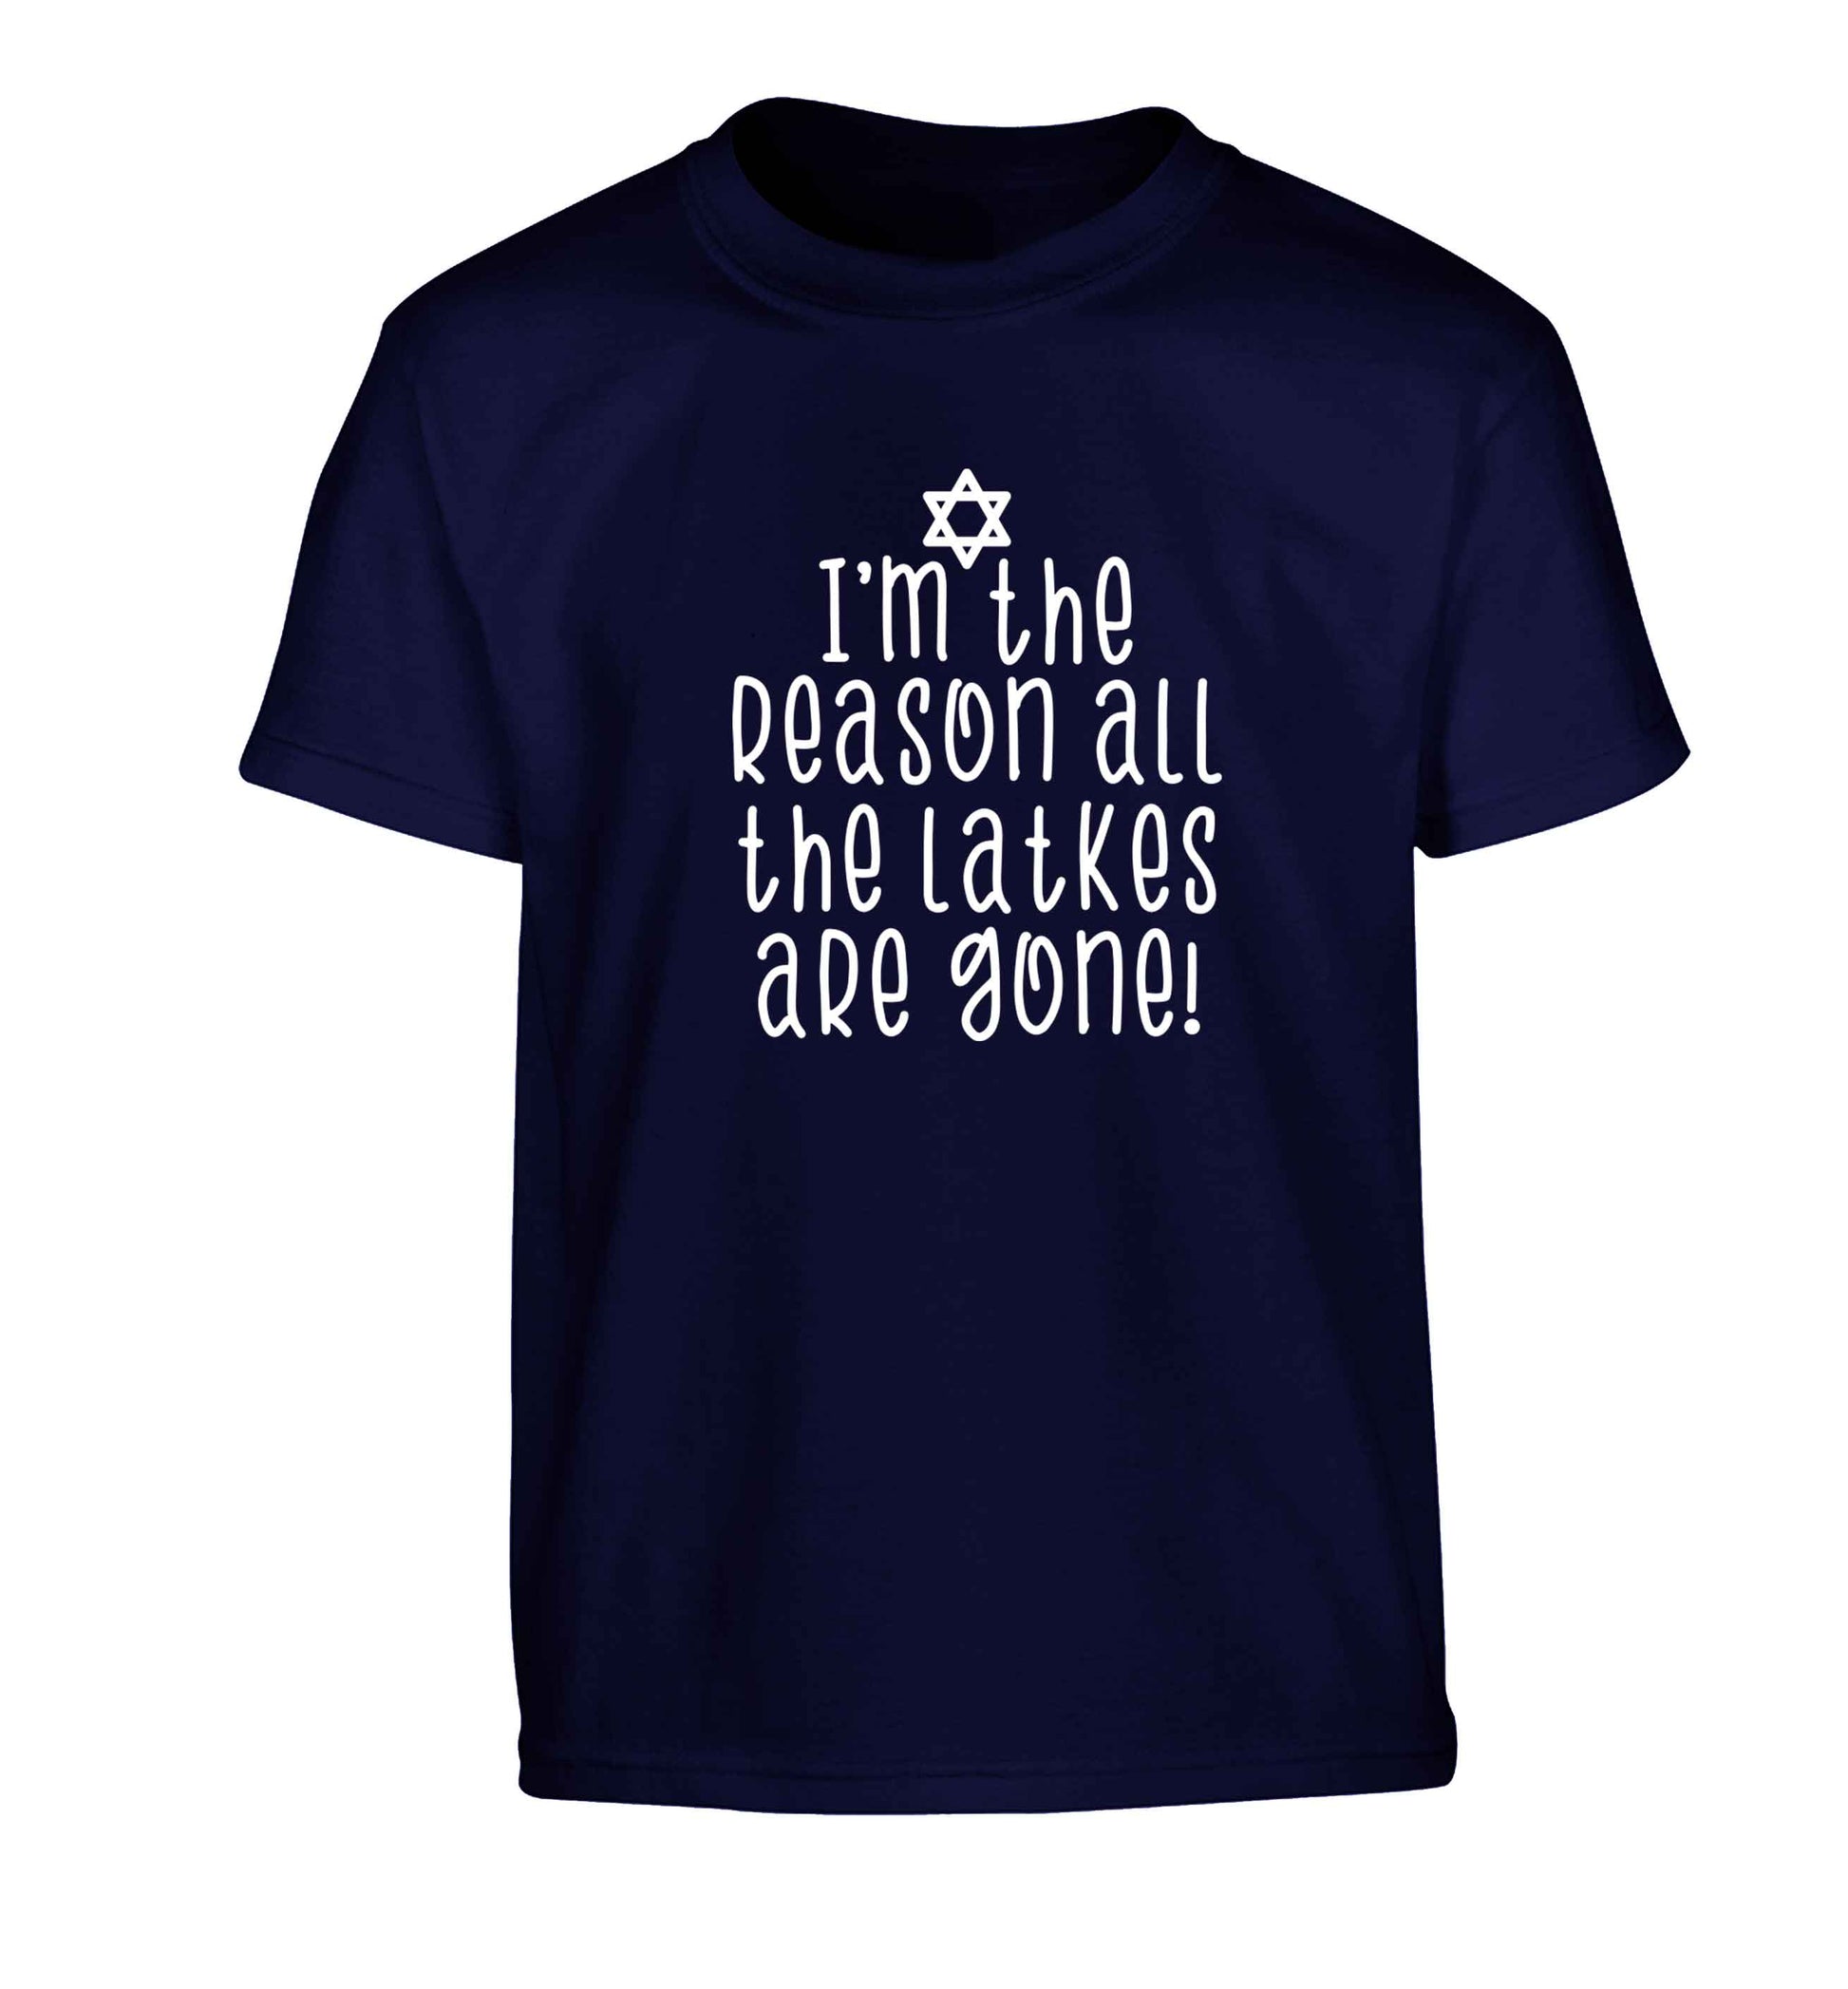 I'm the reason all the latkes are gone Children's navy Tshirt 12-13 Years